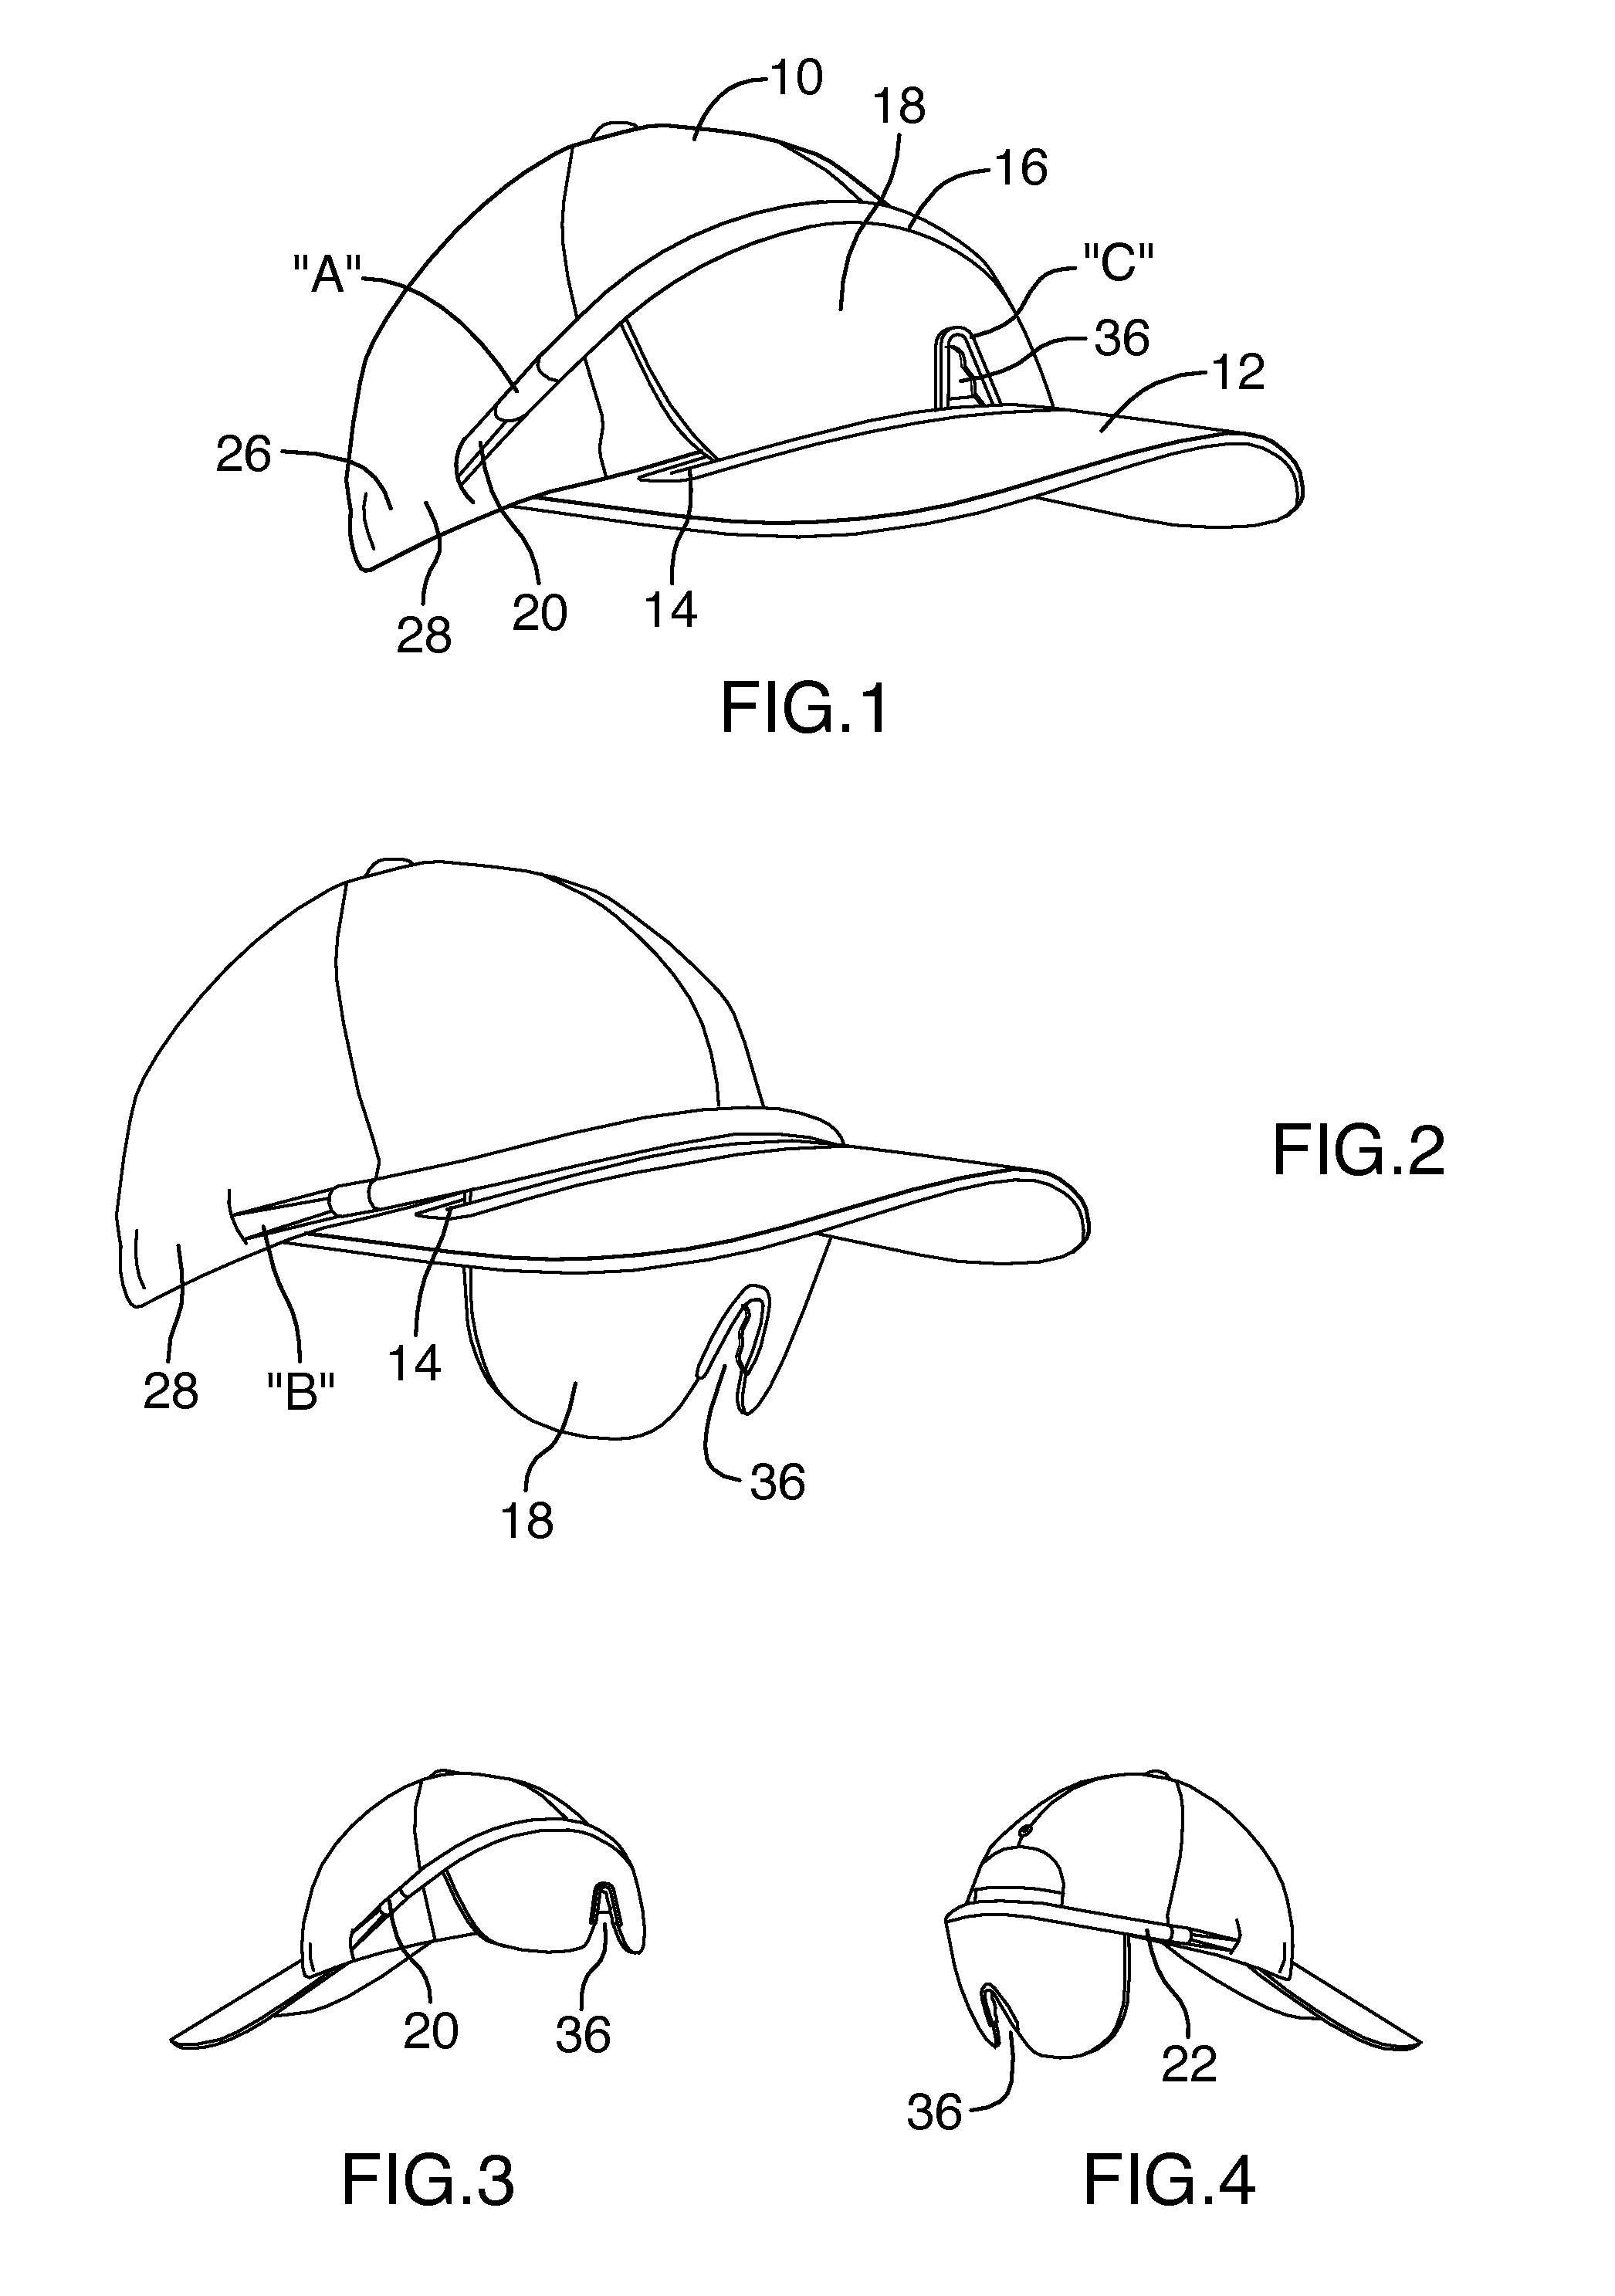 Combination hat and sunglasses/goggles